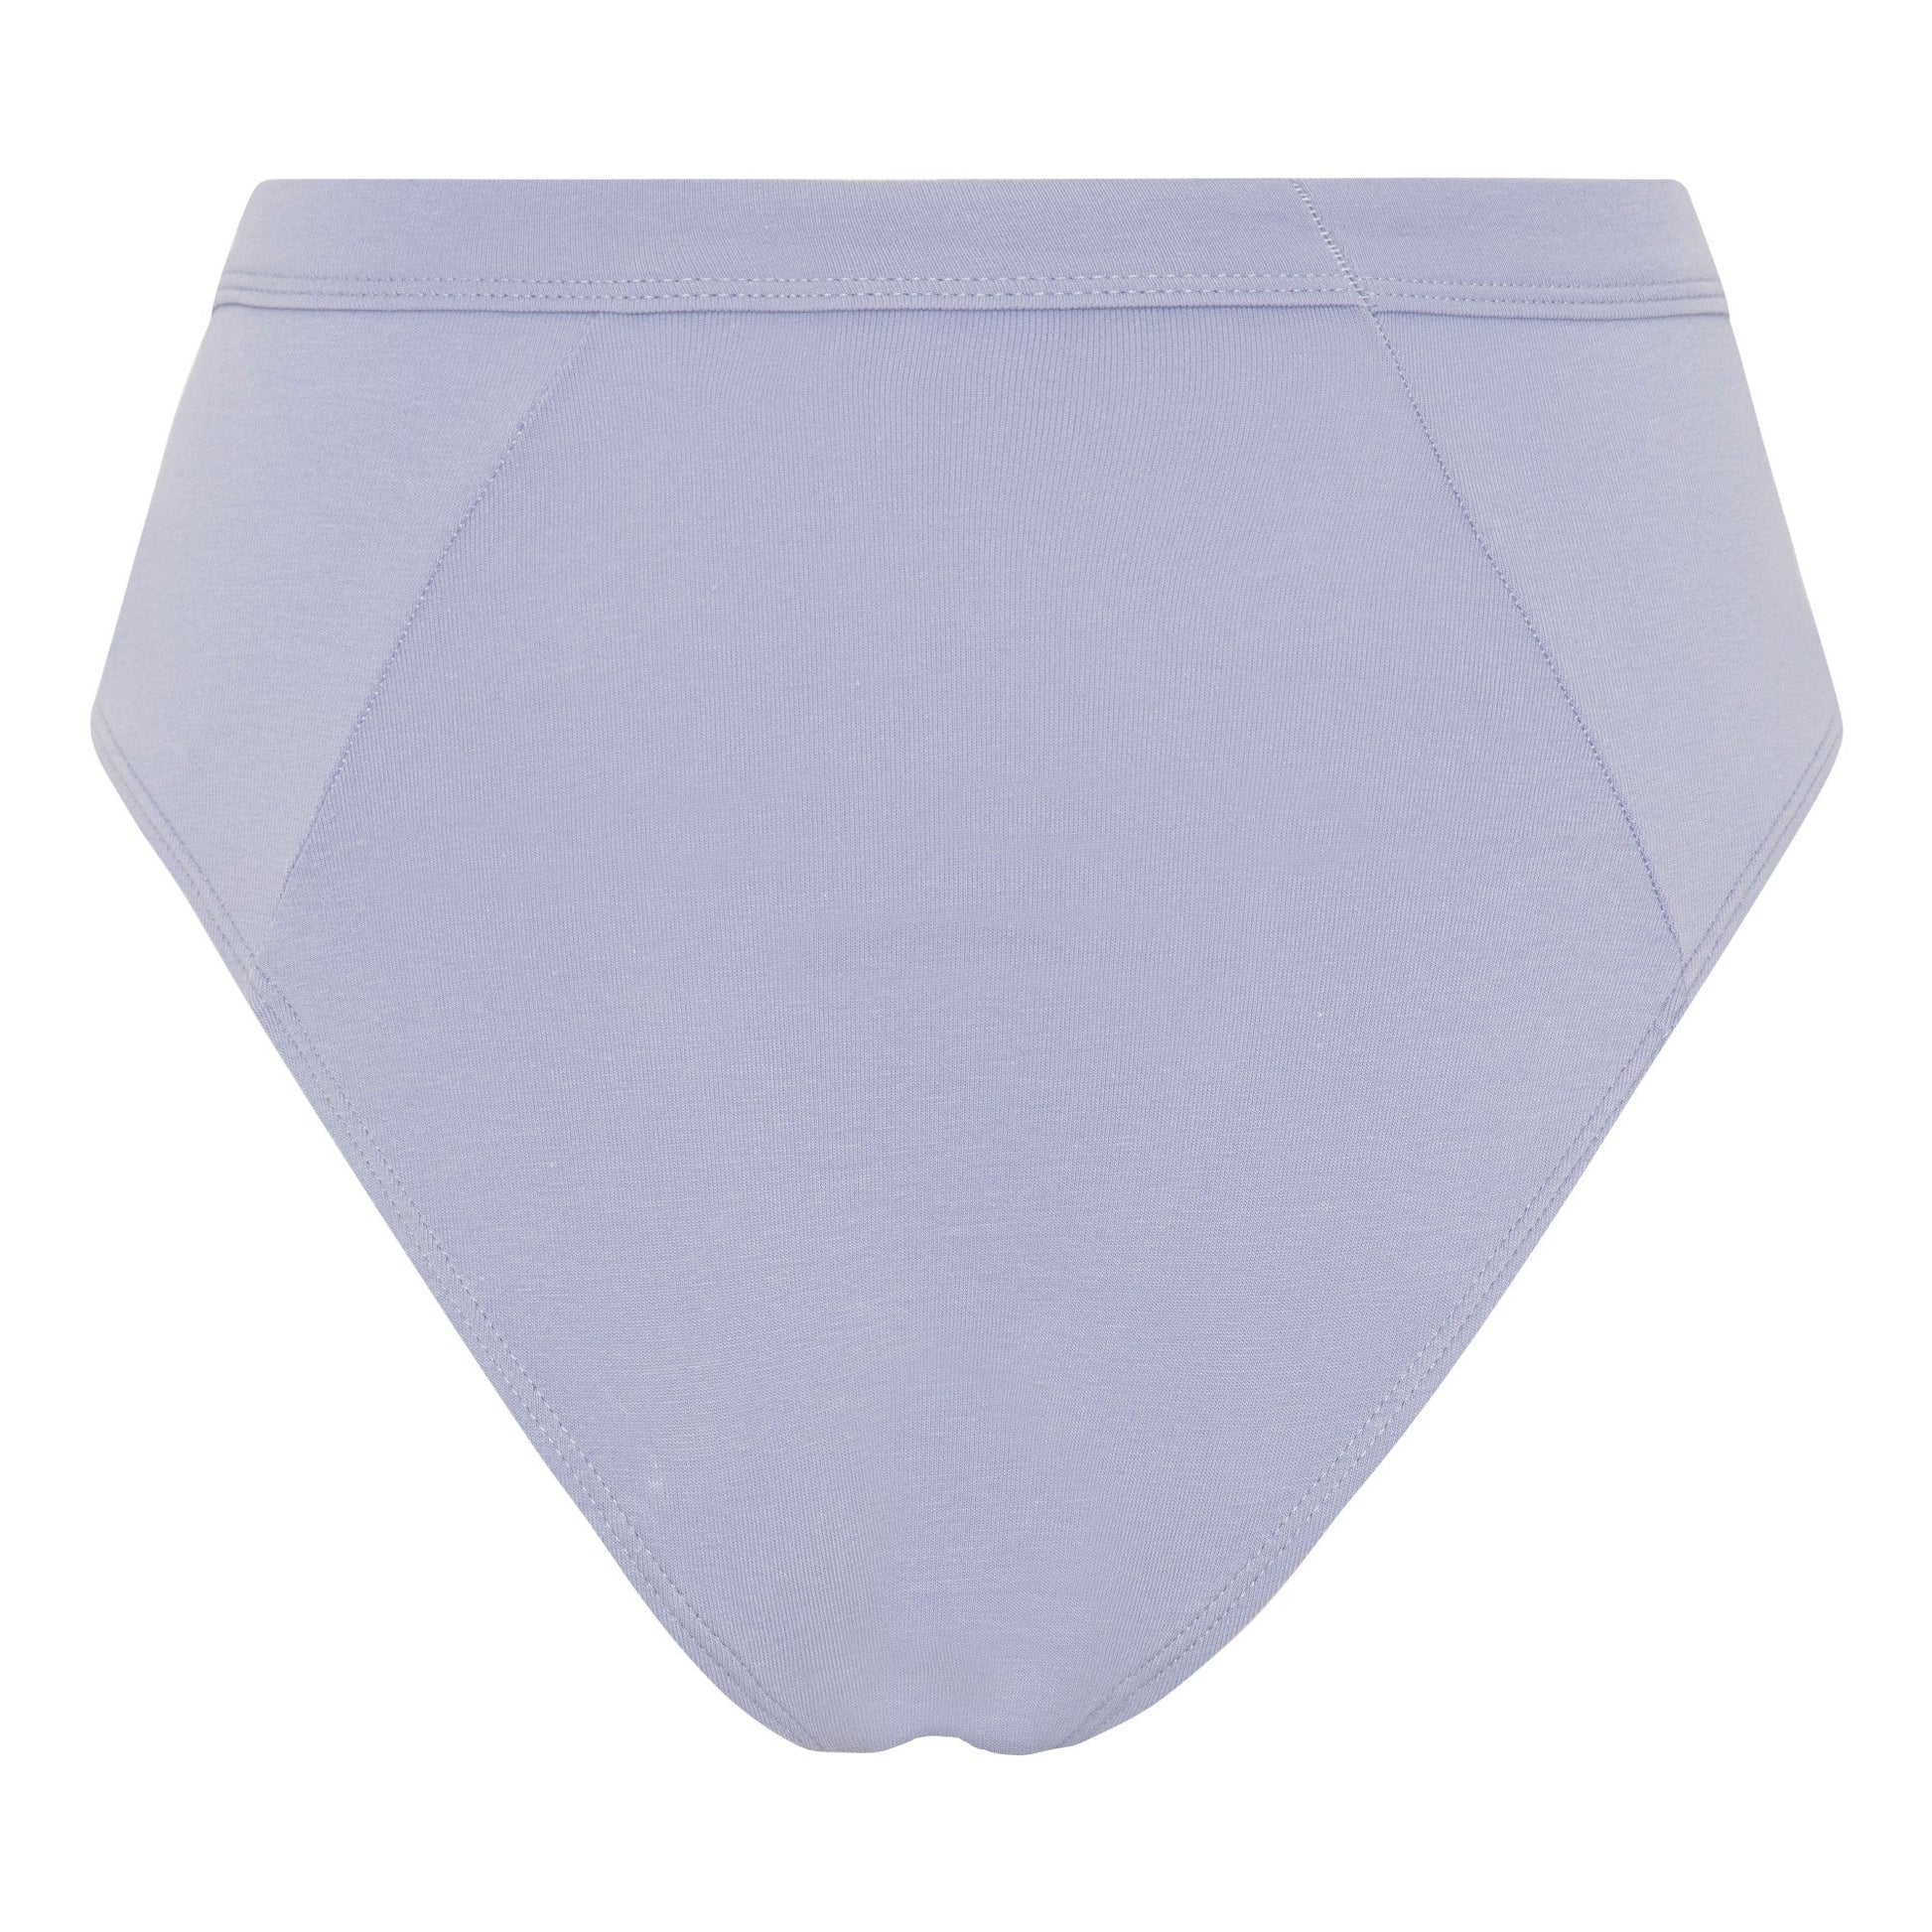 Moons & Junes: Cleo Organic Cotton High-Waisted Thong - M, Last